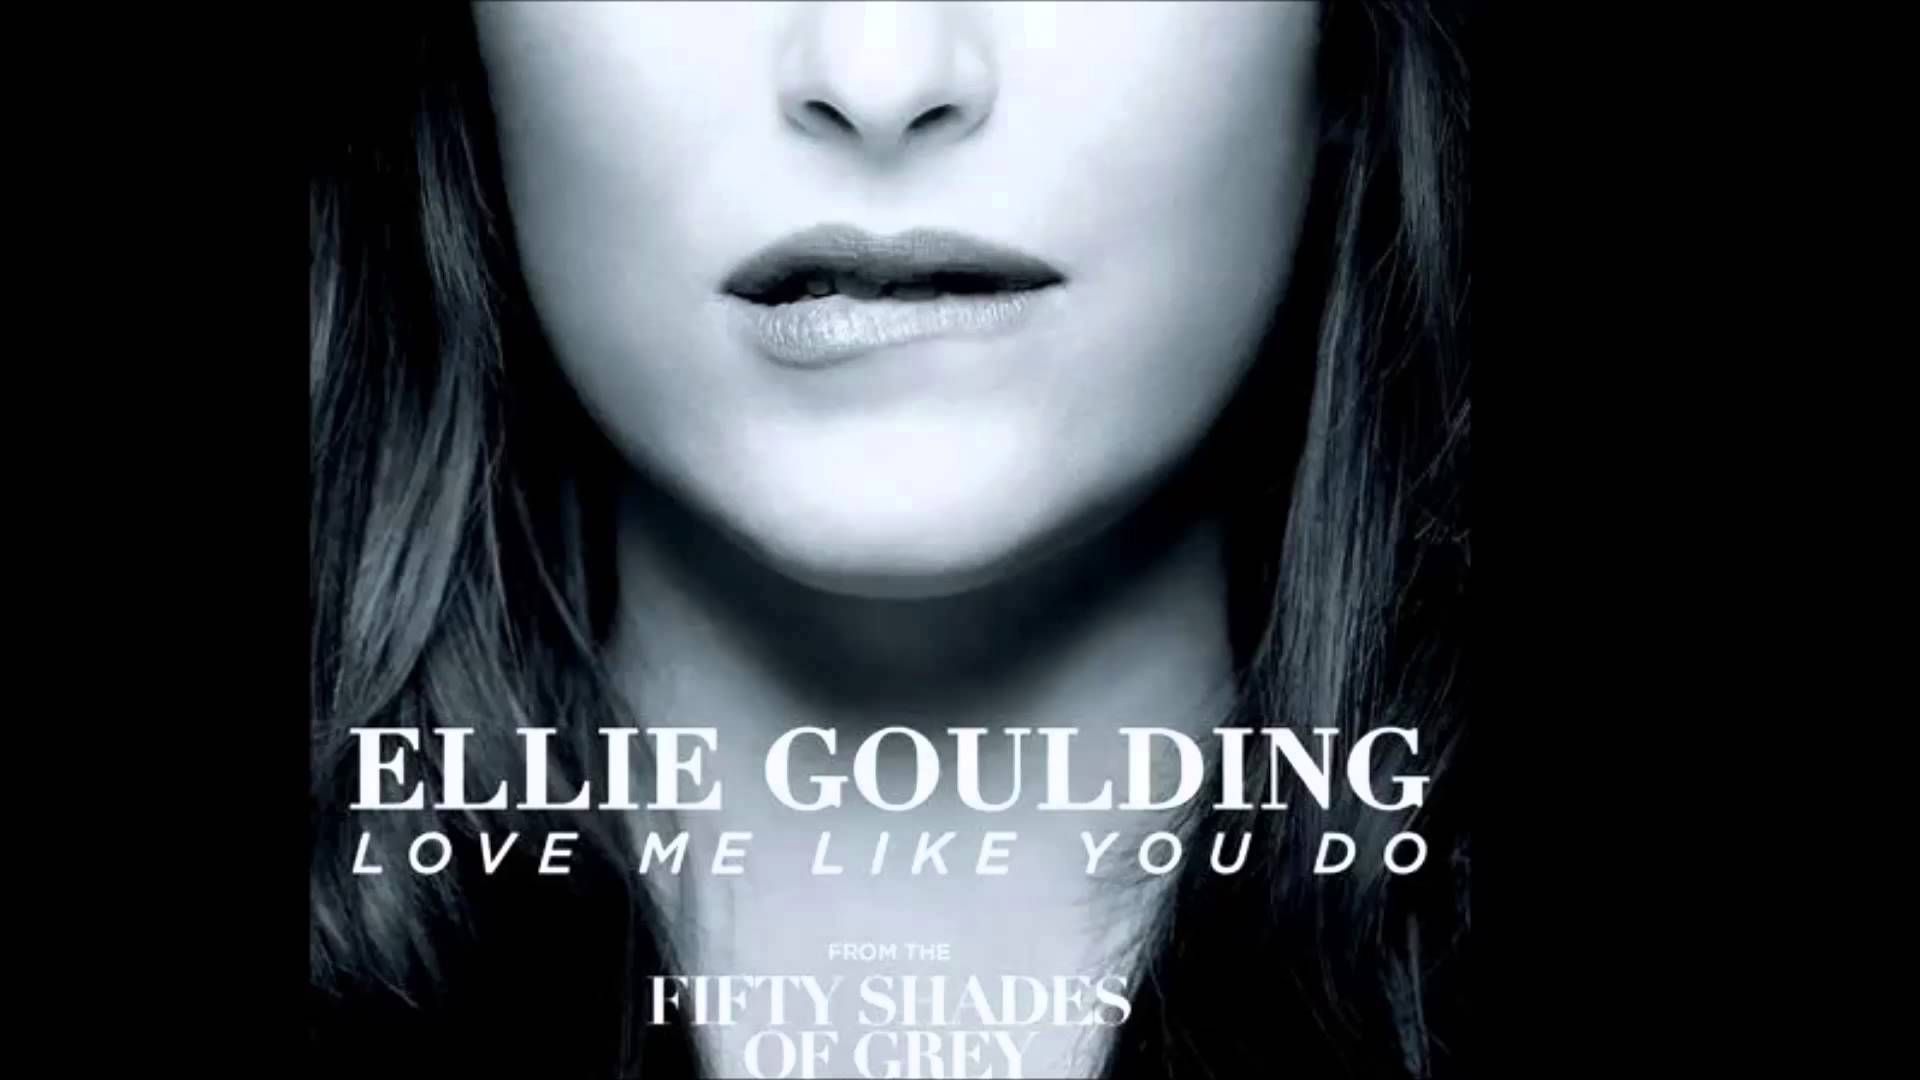 Ellie Goulding Love Me Like You Do Wallpapers - Wallpaper Cave